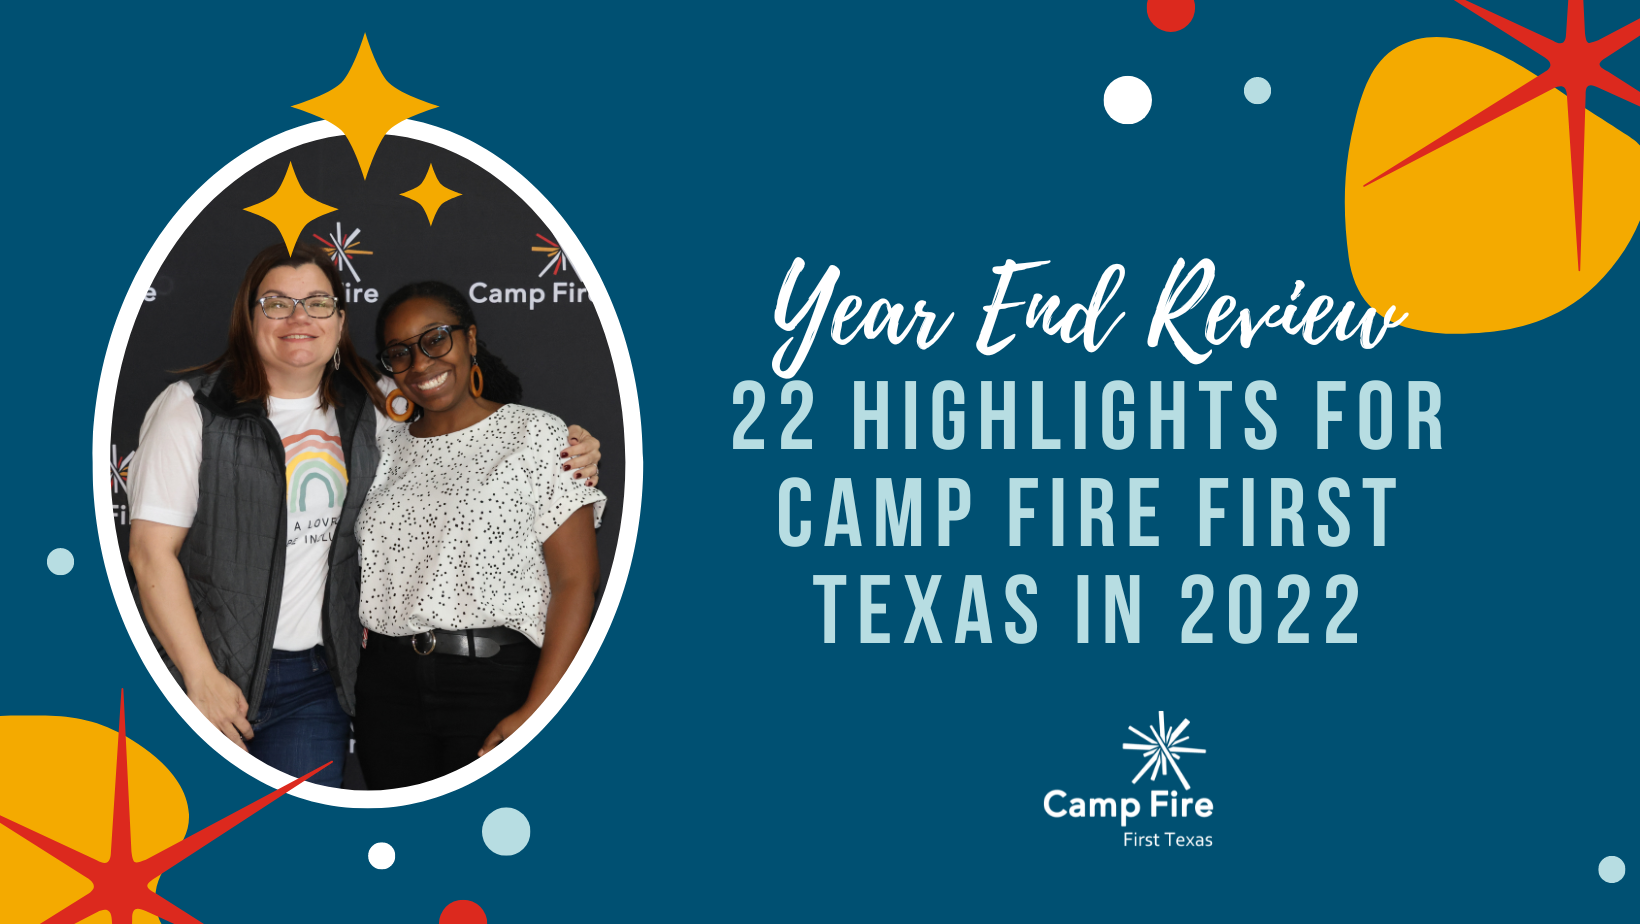 Year End Review: 22 Highlights for Camp Fire First Texas in 2022, a Camp Fire First Texas blog